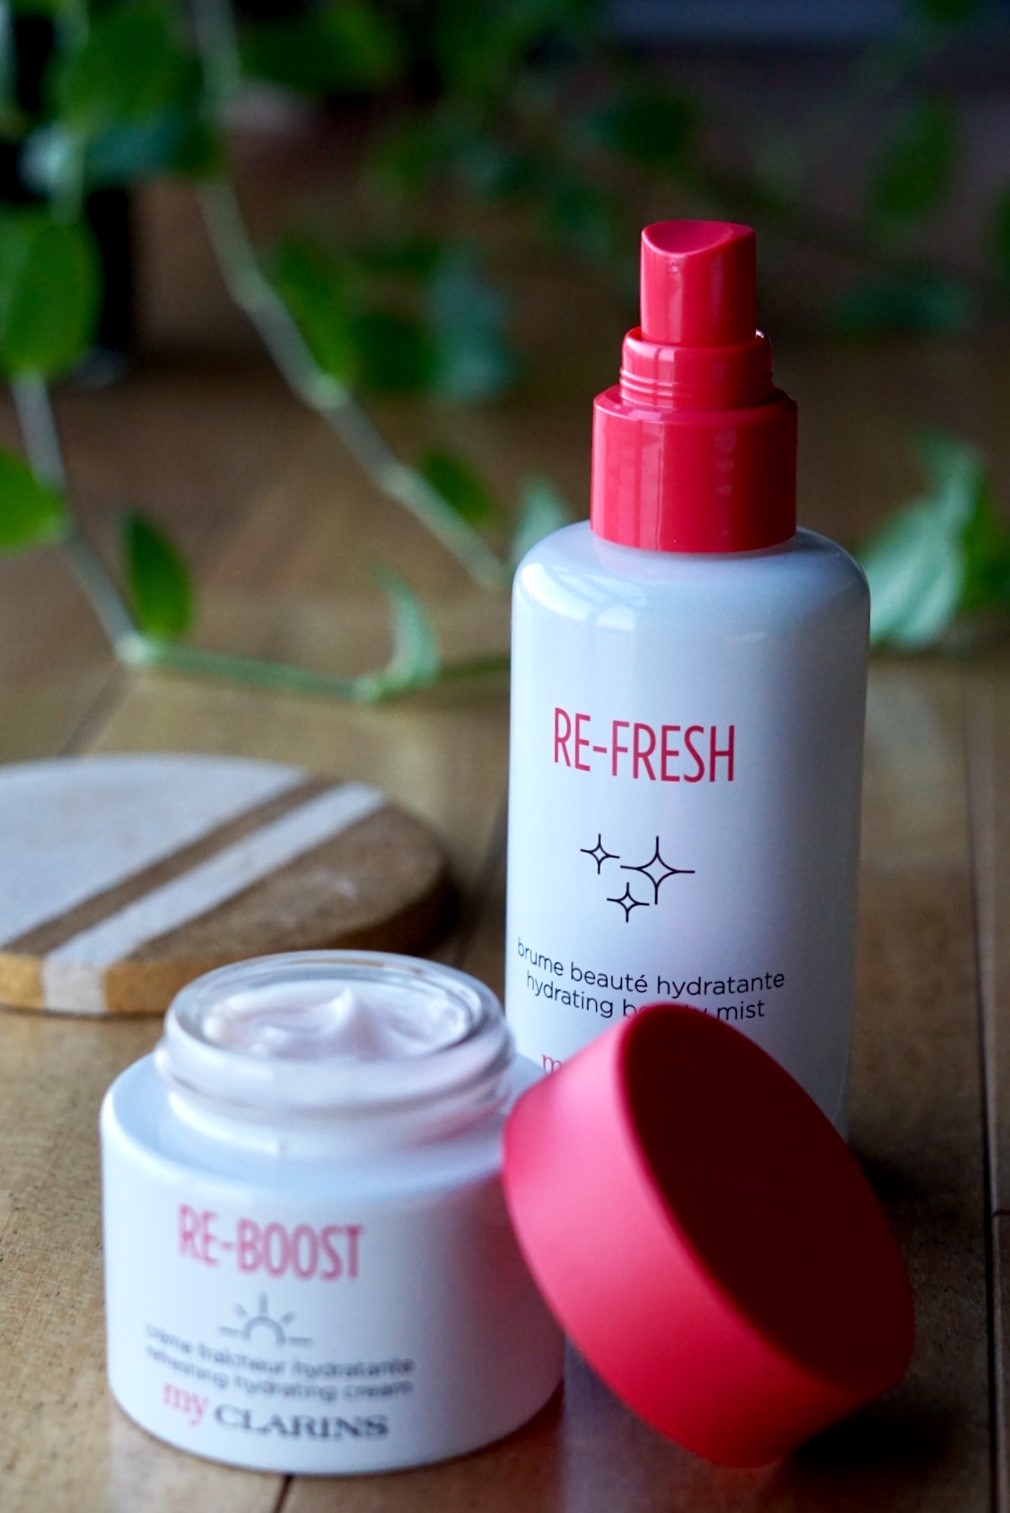 My Clarins RE-BOOST Cream and RE-FRESH Facial Mist